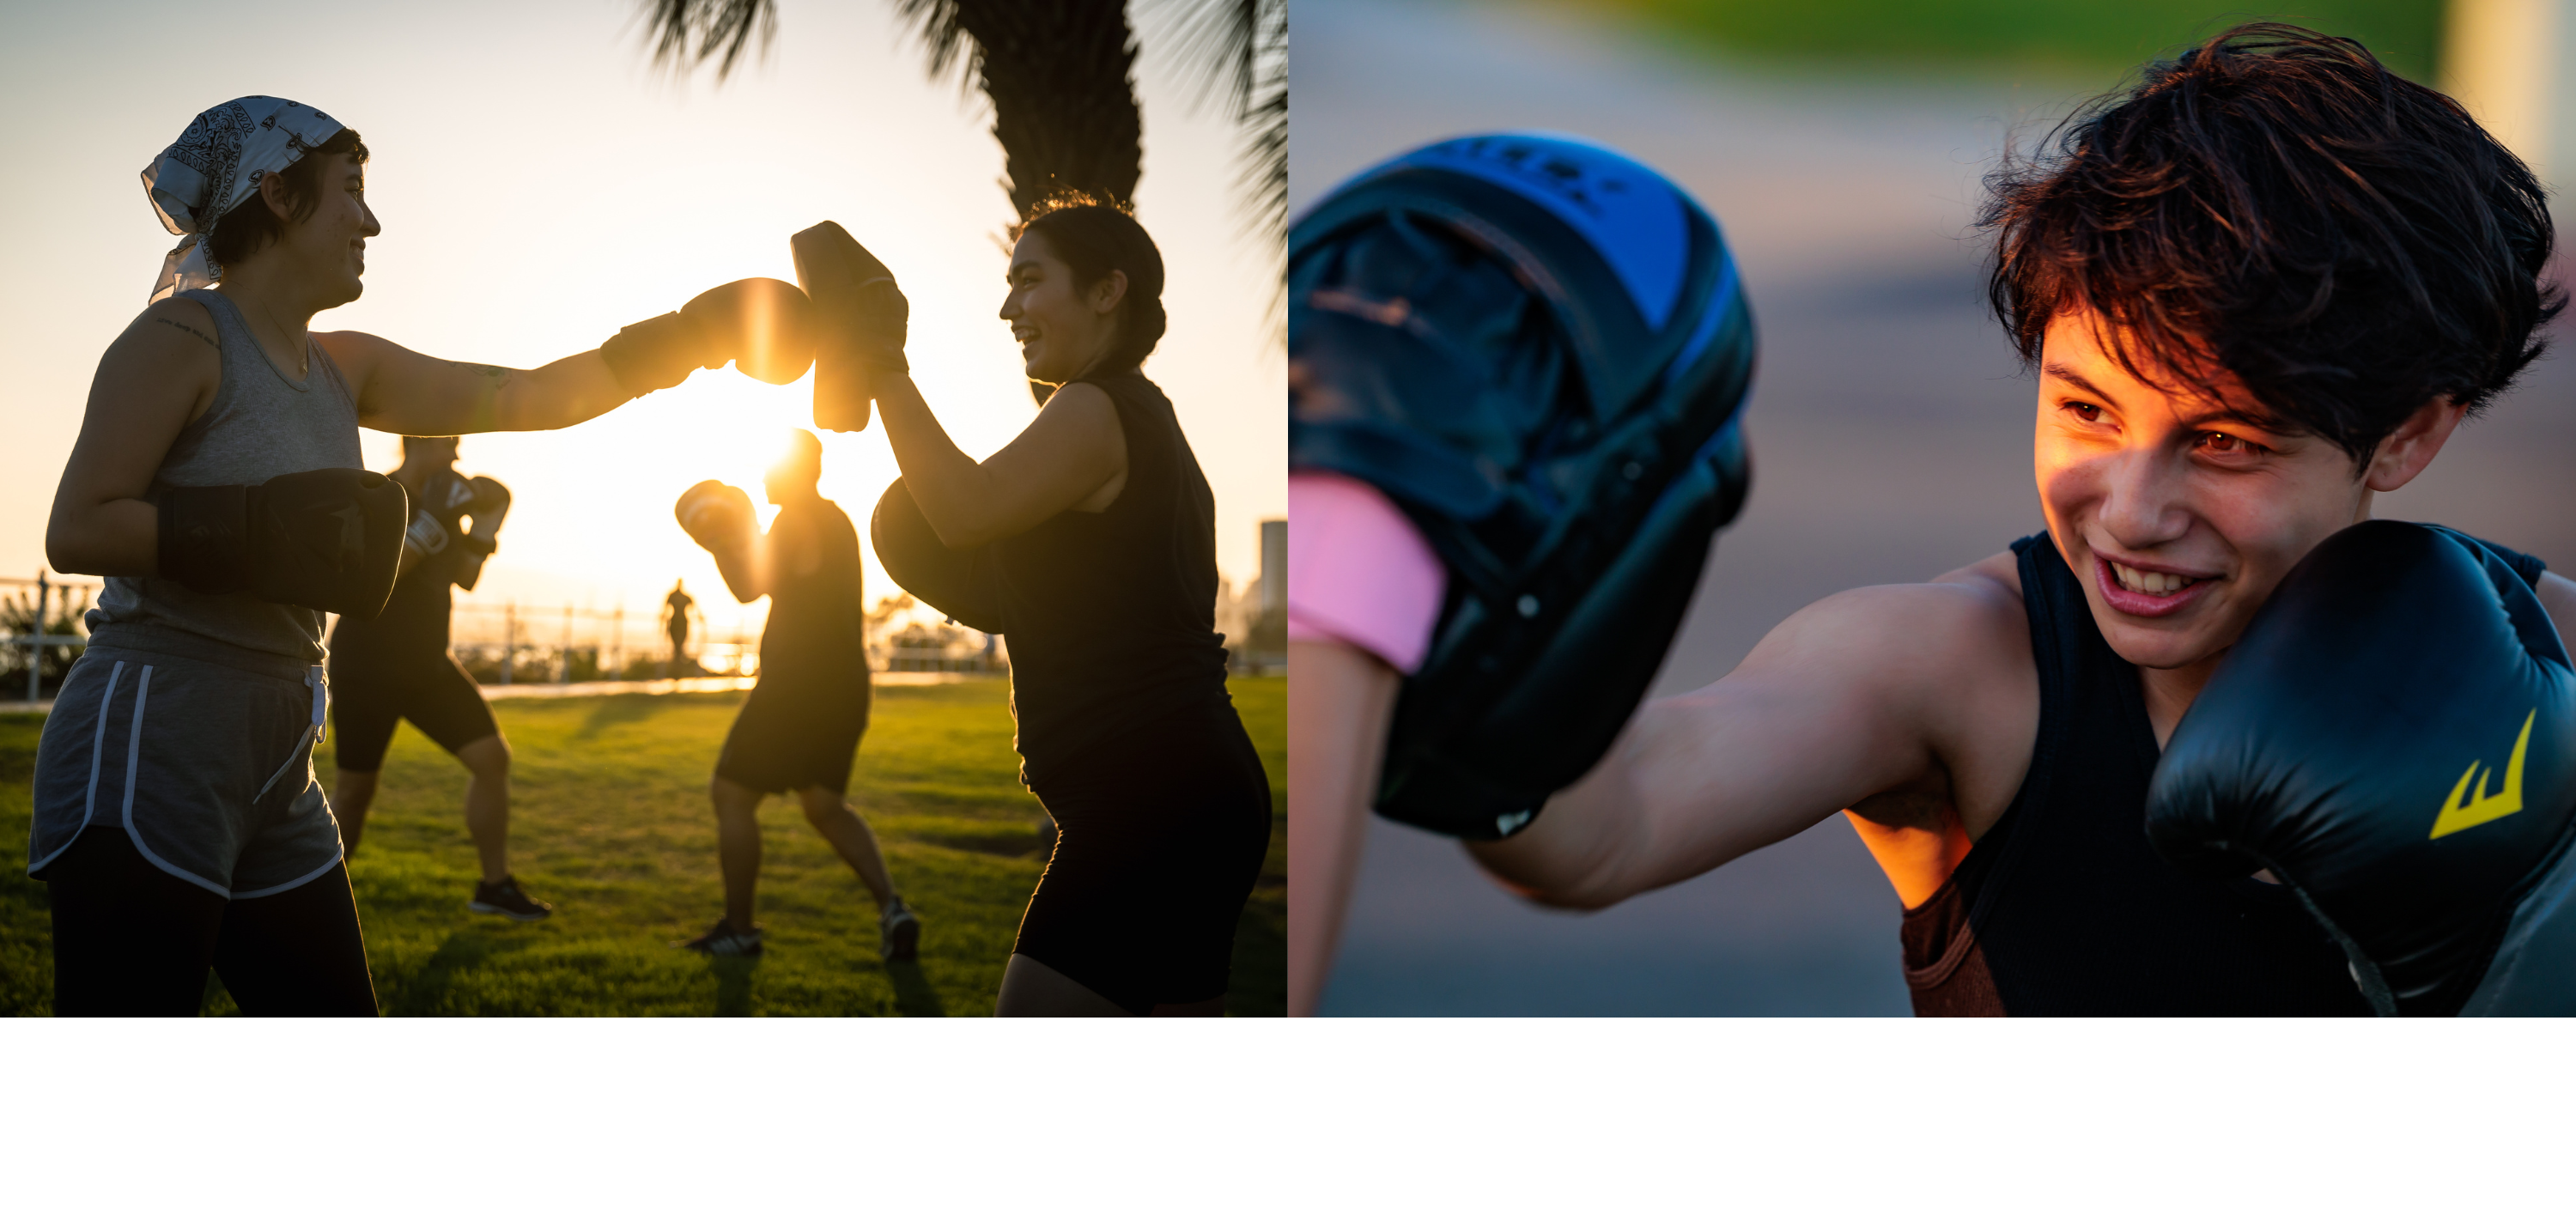 Image for DEVOTION FITNESS, INC. “Sunset Boxing And Wellness”